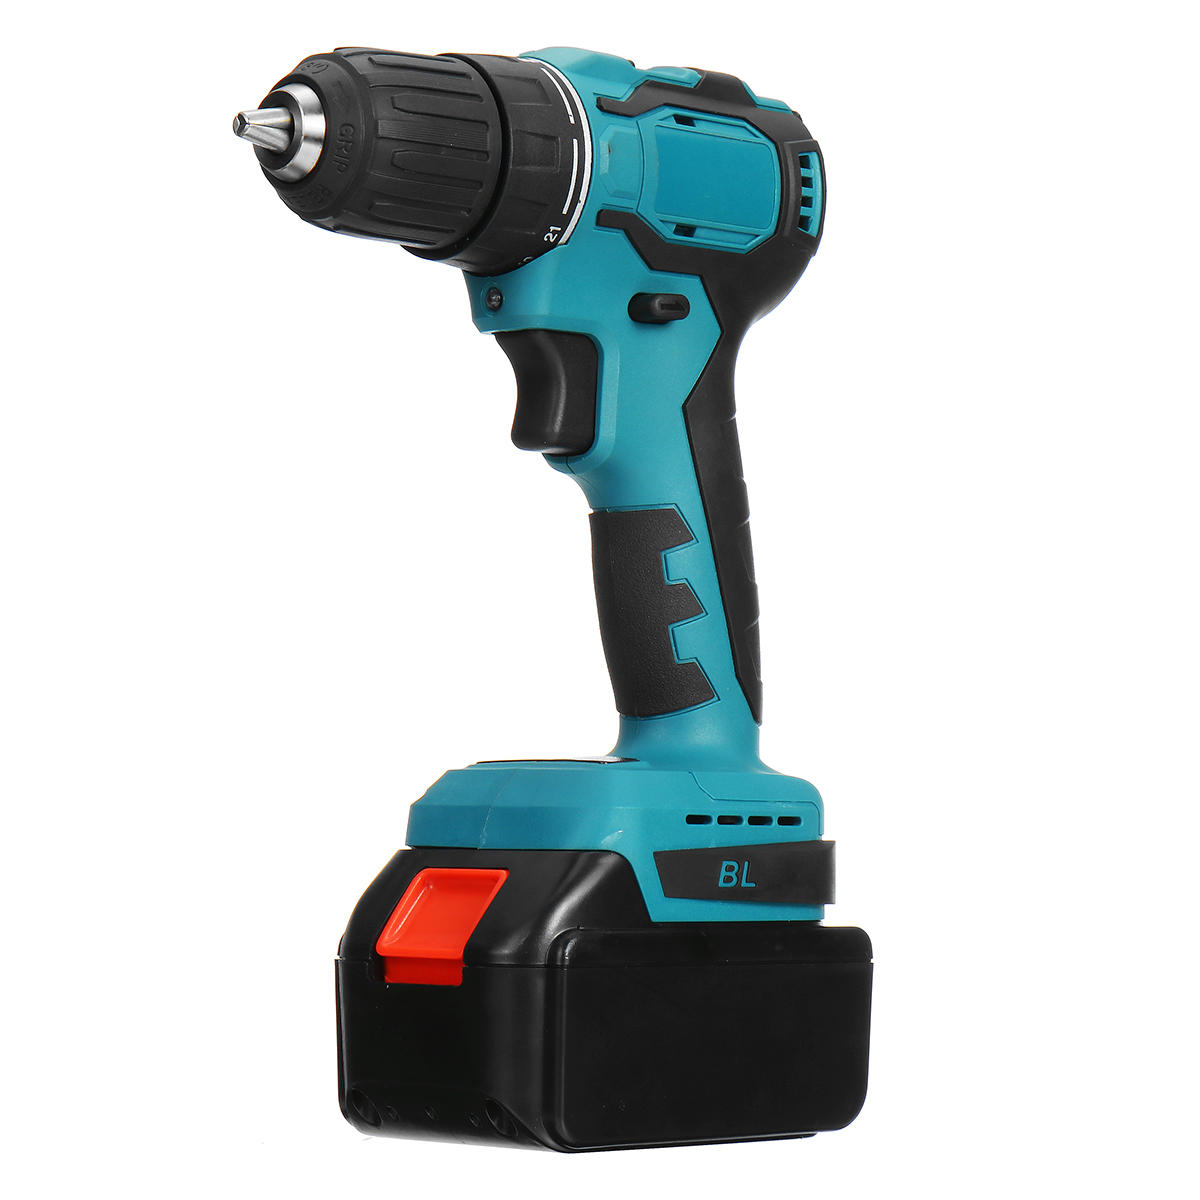 Image of 21V Electric Cordless Drill Driver Dual Speed 150Nm Torque Li-ion Battery